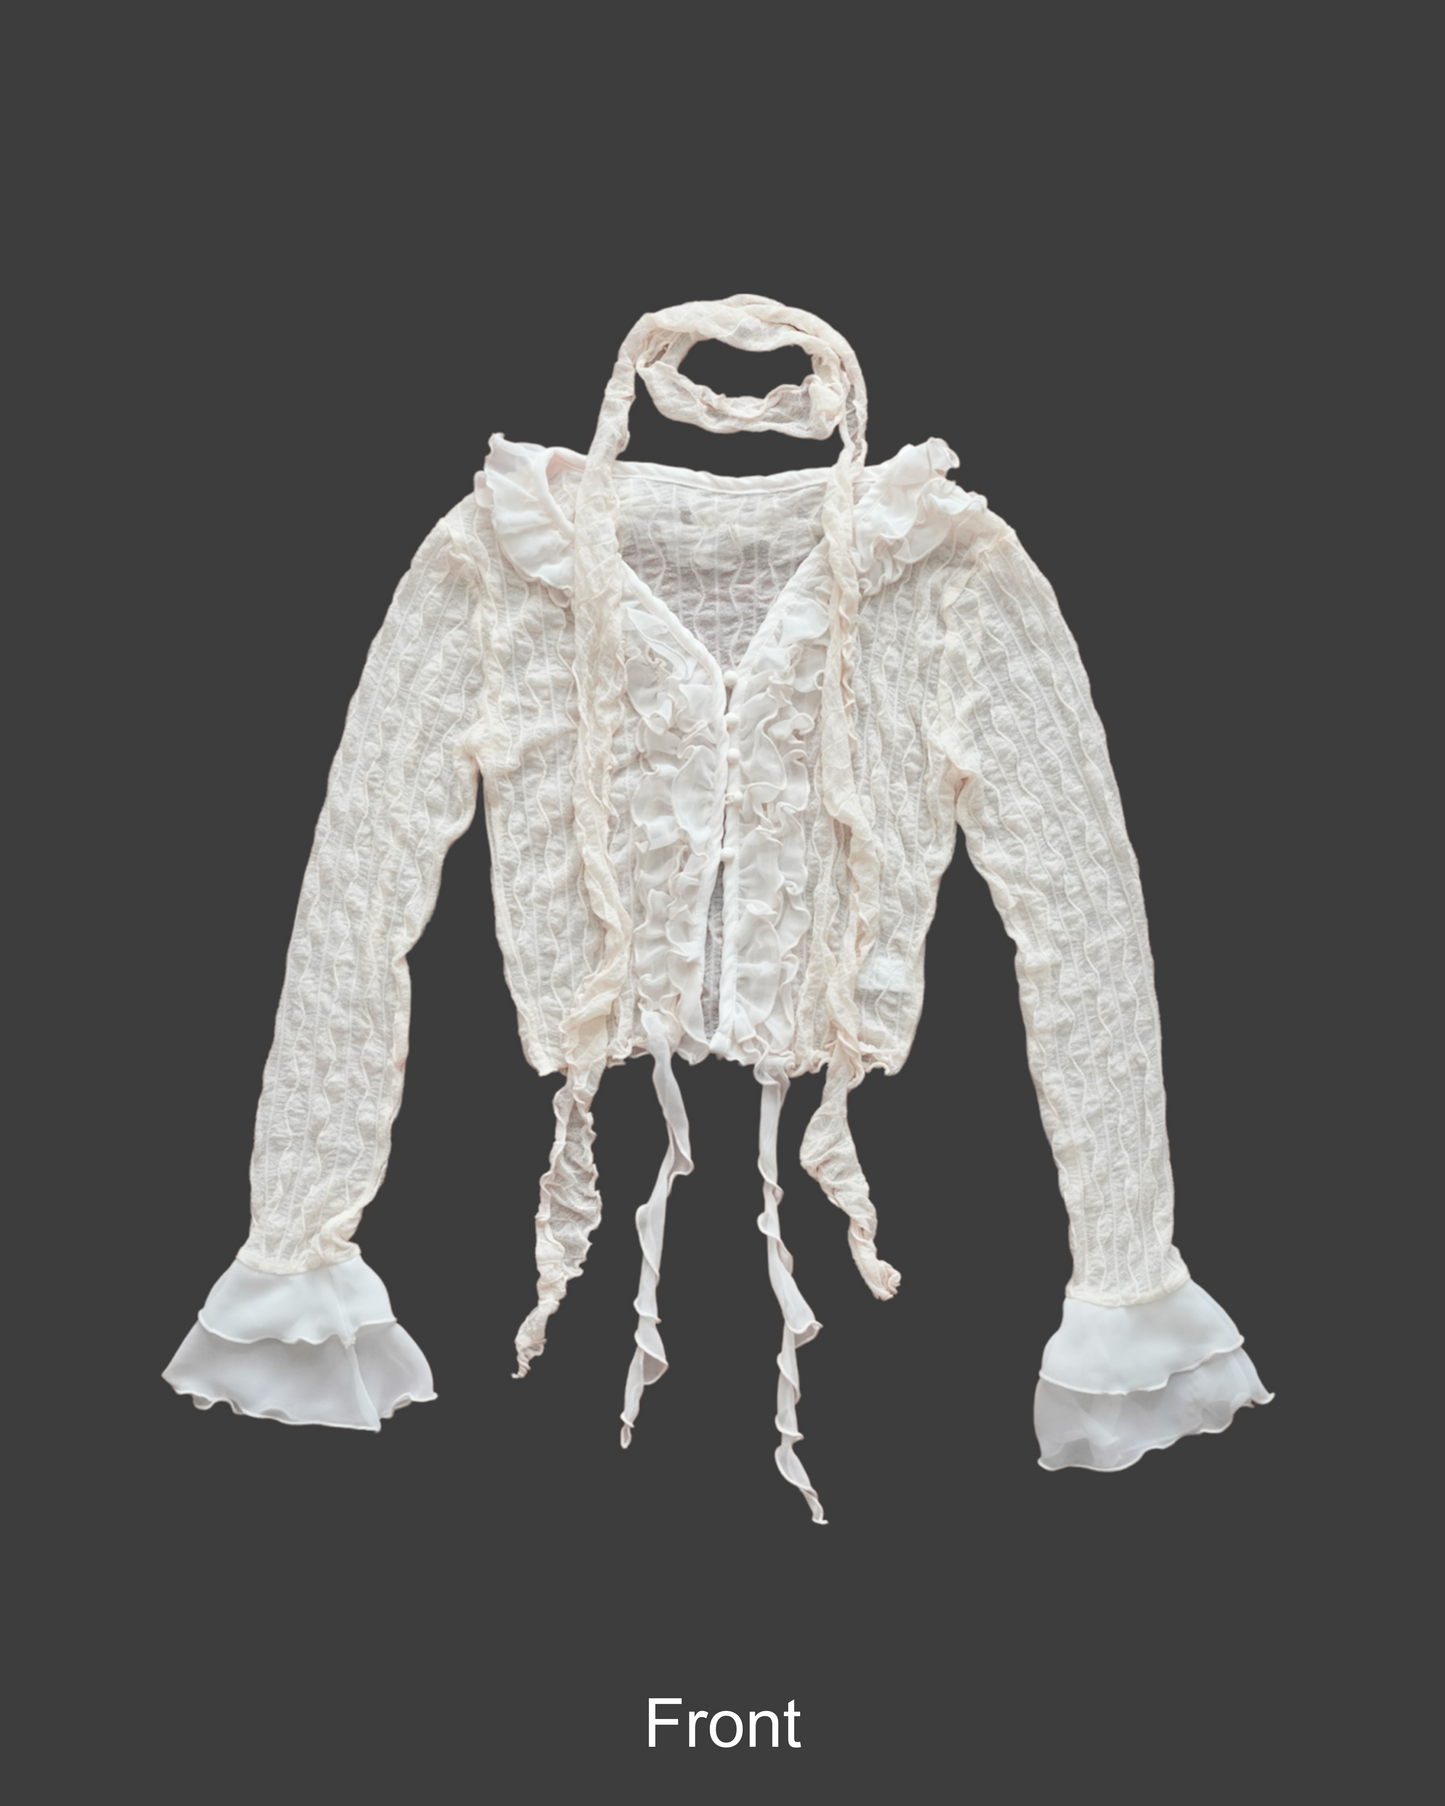 See through ruffle edged cardigan with scarf